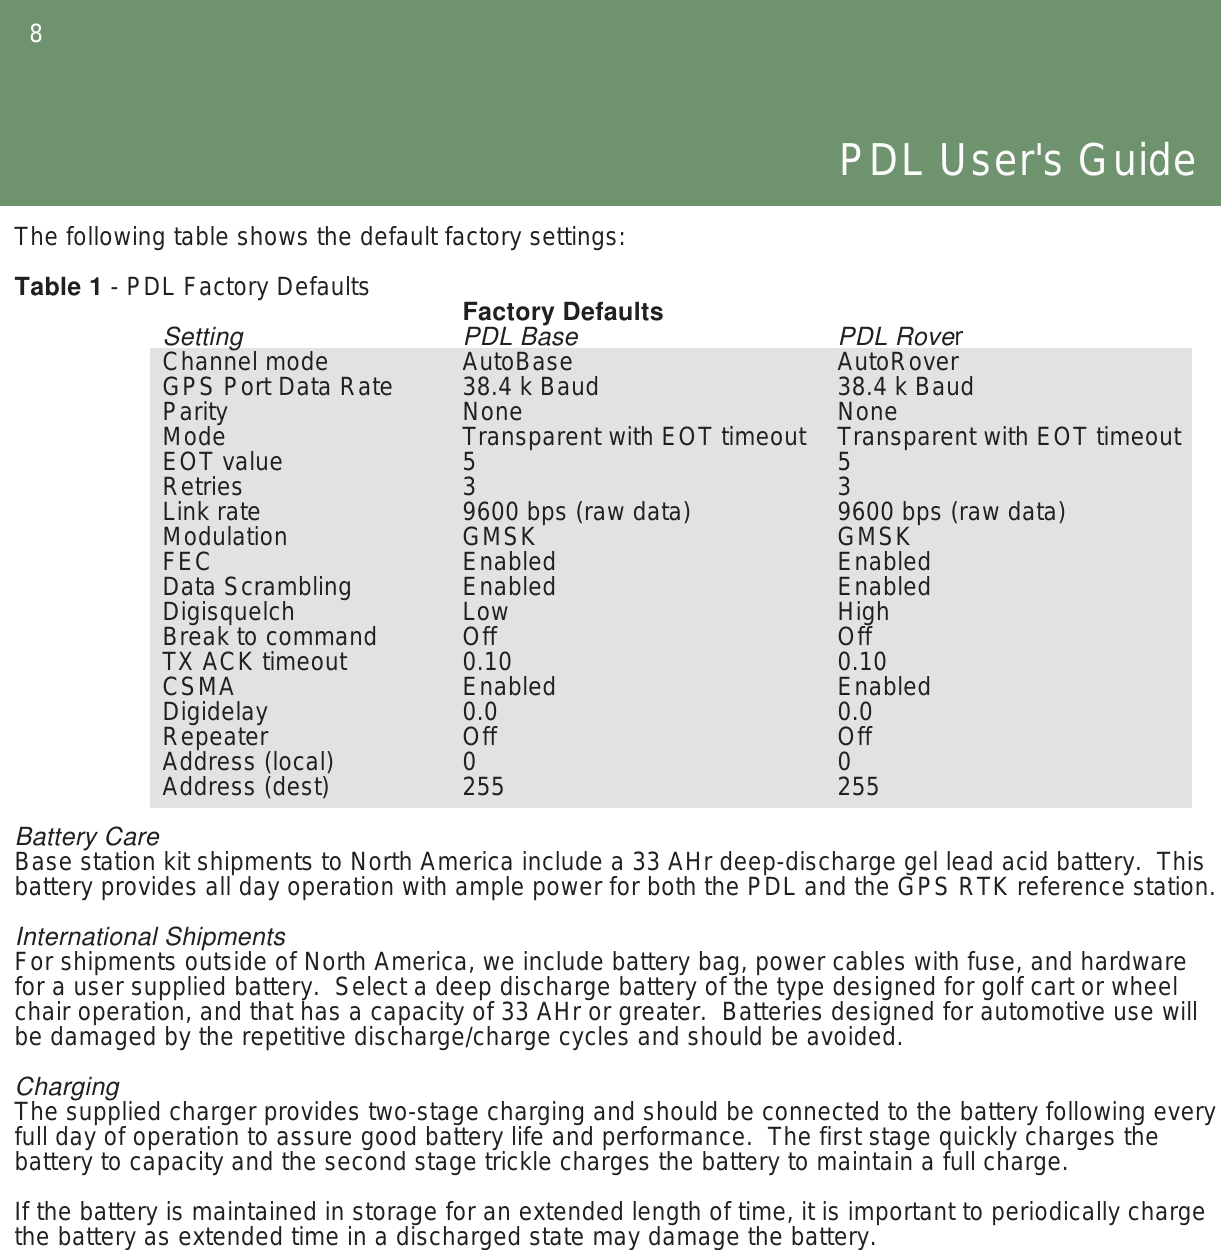 8PDL User&apos;s GuideThe following table shows the default factory settings:Table 1 - PDL Factory DefaultsFactory Defaults  Setting   PDL Base     PDL Rover  Channel mode   AutoBase     AutoRover  GPS Port Data Rate  38.4 k Baud    38.4 k Baud  Parity    None     None  Mode    Transparent with EOT timeout  Transparent with EOT timeout  EOT value    5      5  Retries    3      3  Link rate    9600 bps (raw data)   9600 bps (raw data)  Modulation    GMSK     GMSK  FEC     Enabled     Enabled  Data Scrambling   Enabled     Enabled  Digisquelch   Low      High  Break to command  Off      Off  TX ACK timeout   0.10      0.10  CSMA    Enabled     Enabled  Digidelay    0.0      0.0  Repeater    Off     Off  Address (local)   0      0  Address (dest)   255      255Battery CareBase station kit shipments to North America include a 33 AHr deep-discharge gel lead acid battery.  This battery provides all day operation with ample power for both the PDL and the GPS RTK reference station.International ShipmentsFor shipments outside of North America, we include battery bag, power cables with fuse, and hardware for a user supplied battery.  Select a deep discharge battery of the type designed for golf cart or wheel chair operation, and that has a capacity of 33 AHr or greater.  Batteries designed for automotive use will be damaged by the repetitive discharge/charge cycles and should be avoided.ChargingThe supplied charger provides two-stage charging and should be connected to the battery following every full day of operation to assure good battery life and performance.  The first stage quickly charges the battery to capacity and the second stage trickle charges the battery to maintain a full charge.If the battery is maintained in storage for an extended length of time, it is important to periodically charge the battery as extended time in a discharged state may damage the battery.      